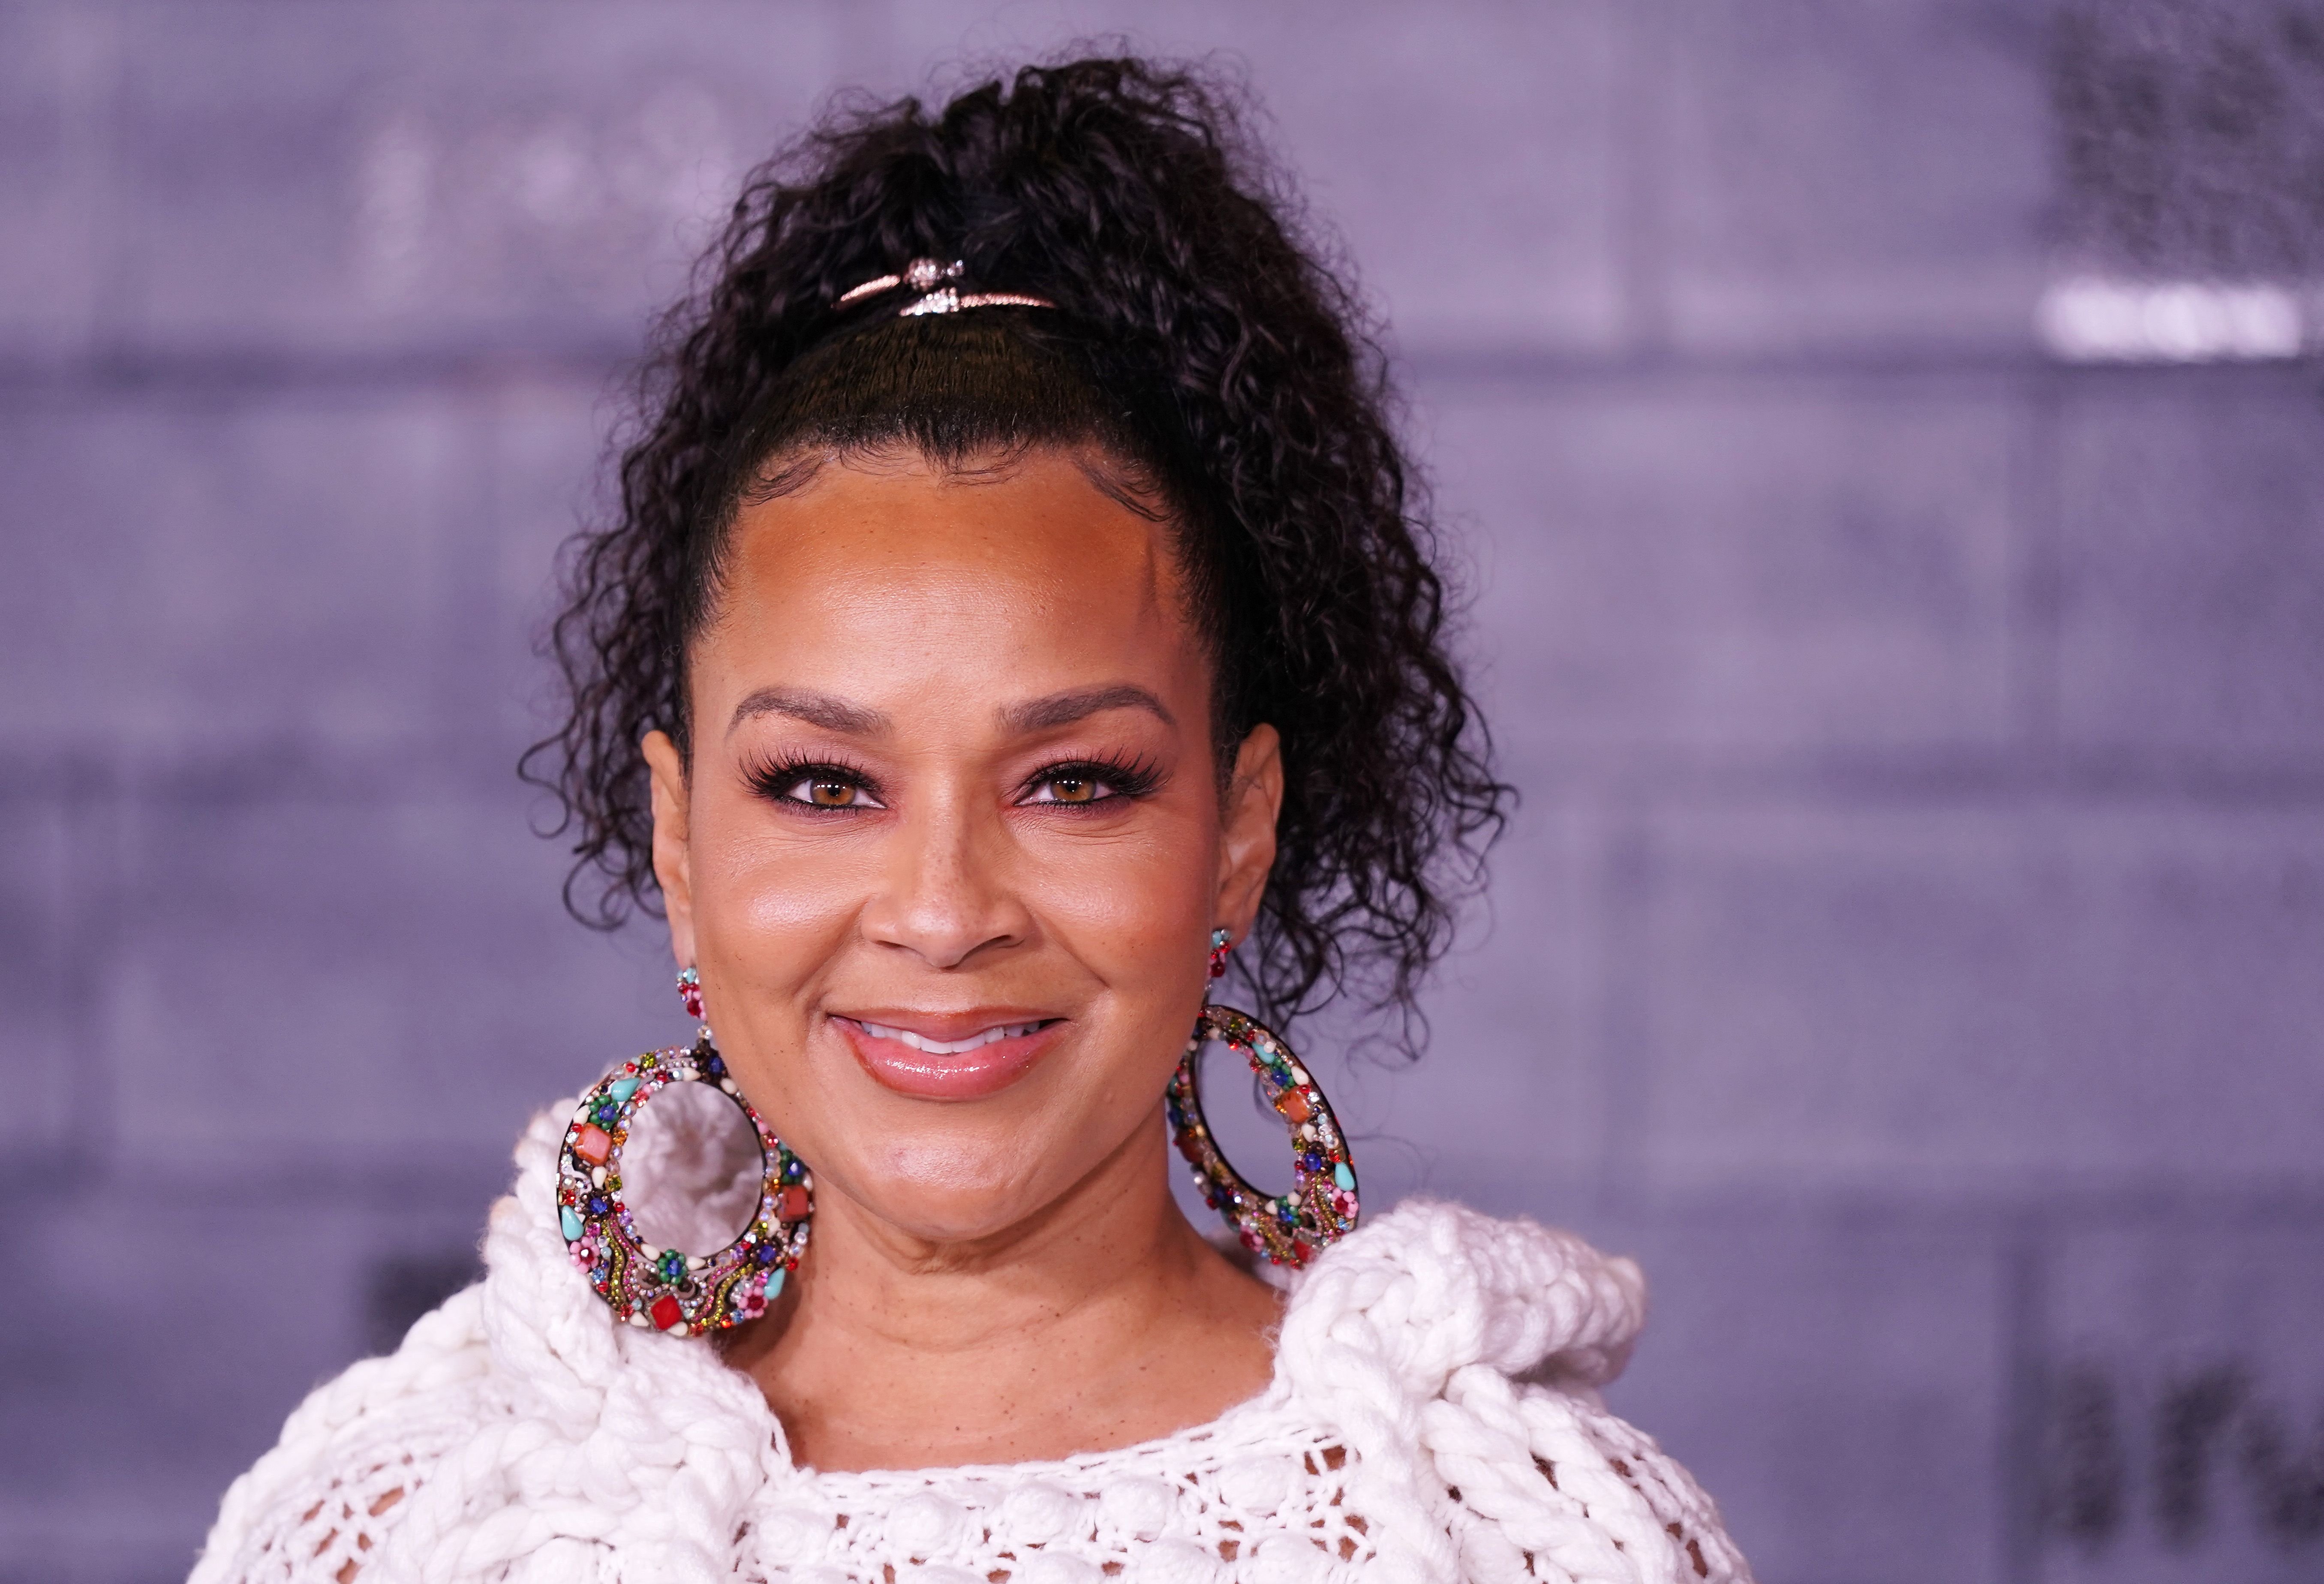 LisaRaye McCoy during the world premiere of "Bad Boys for Life" at TCL Chinese Theatre on January 14, 2020 in Hollywood, California. | Source: Getty Images